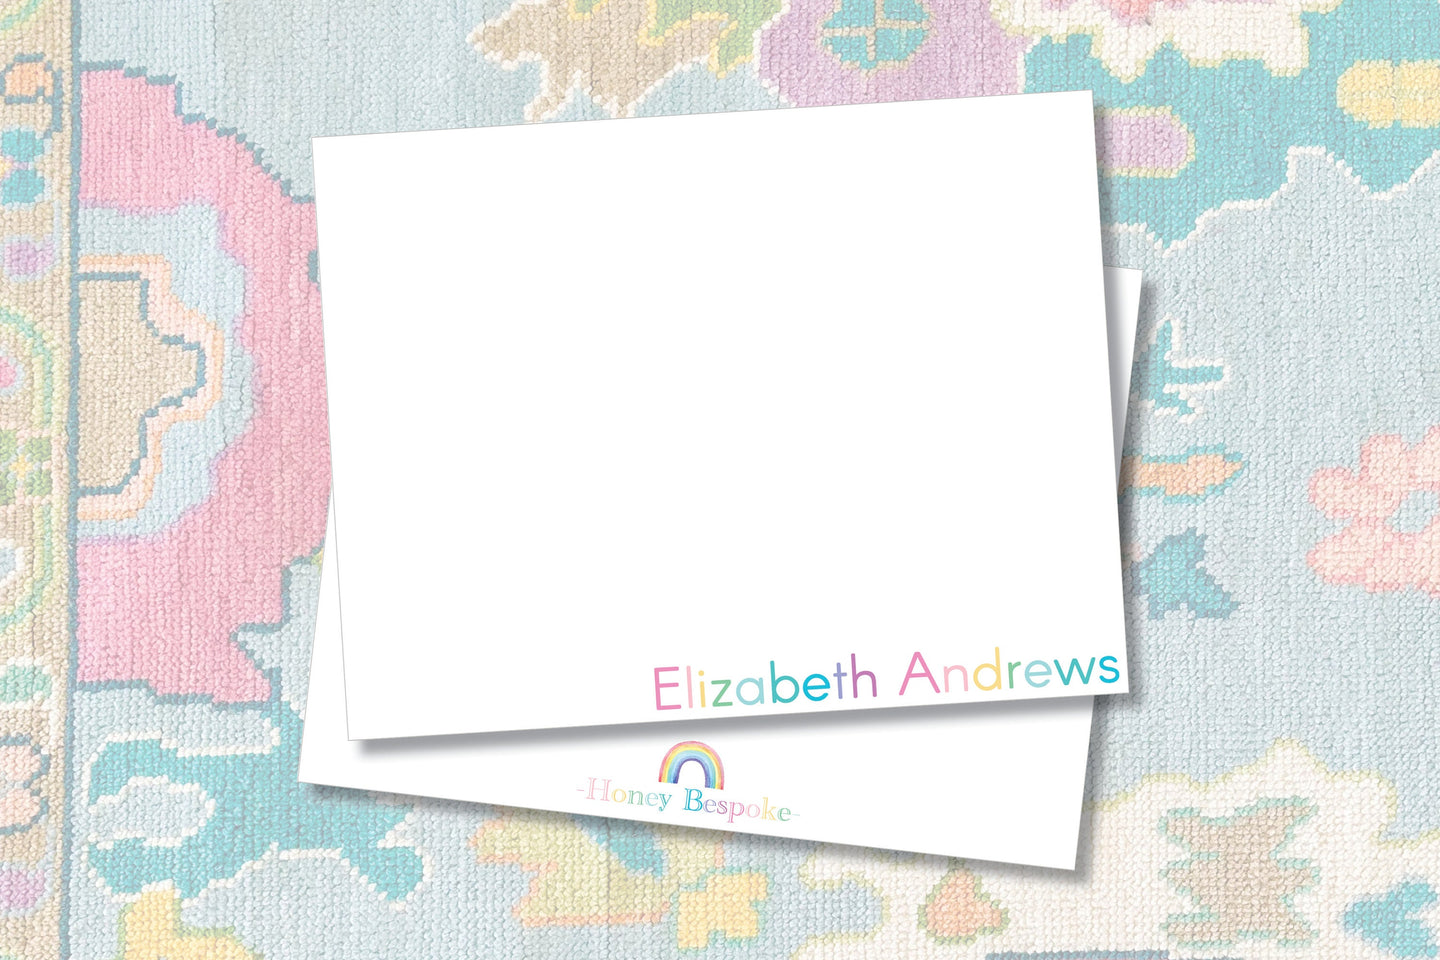 Personalized Rainbow Stationery / Girls Stationery Set / Personalized Thank You Cards / Personalized Stationary / Thank you Notes